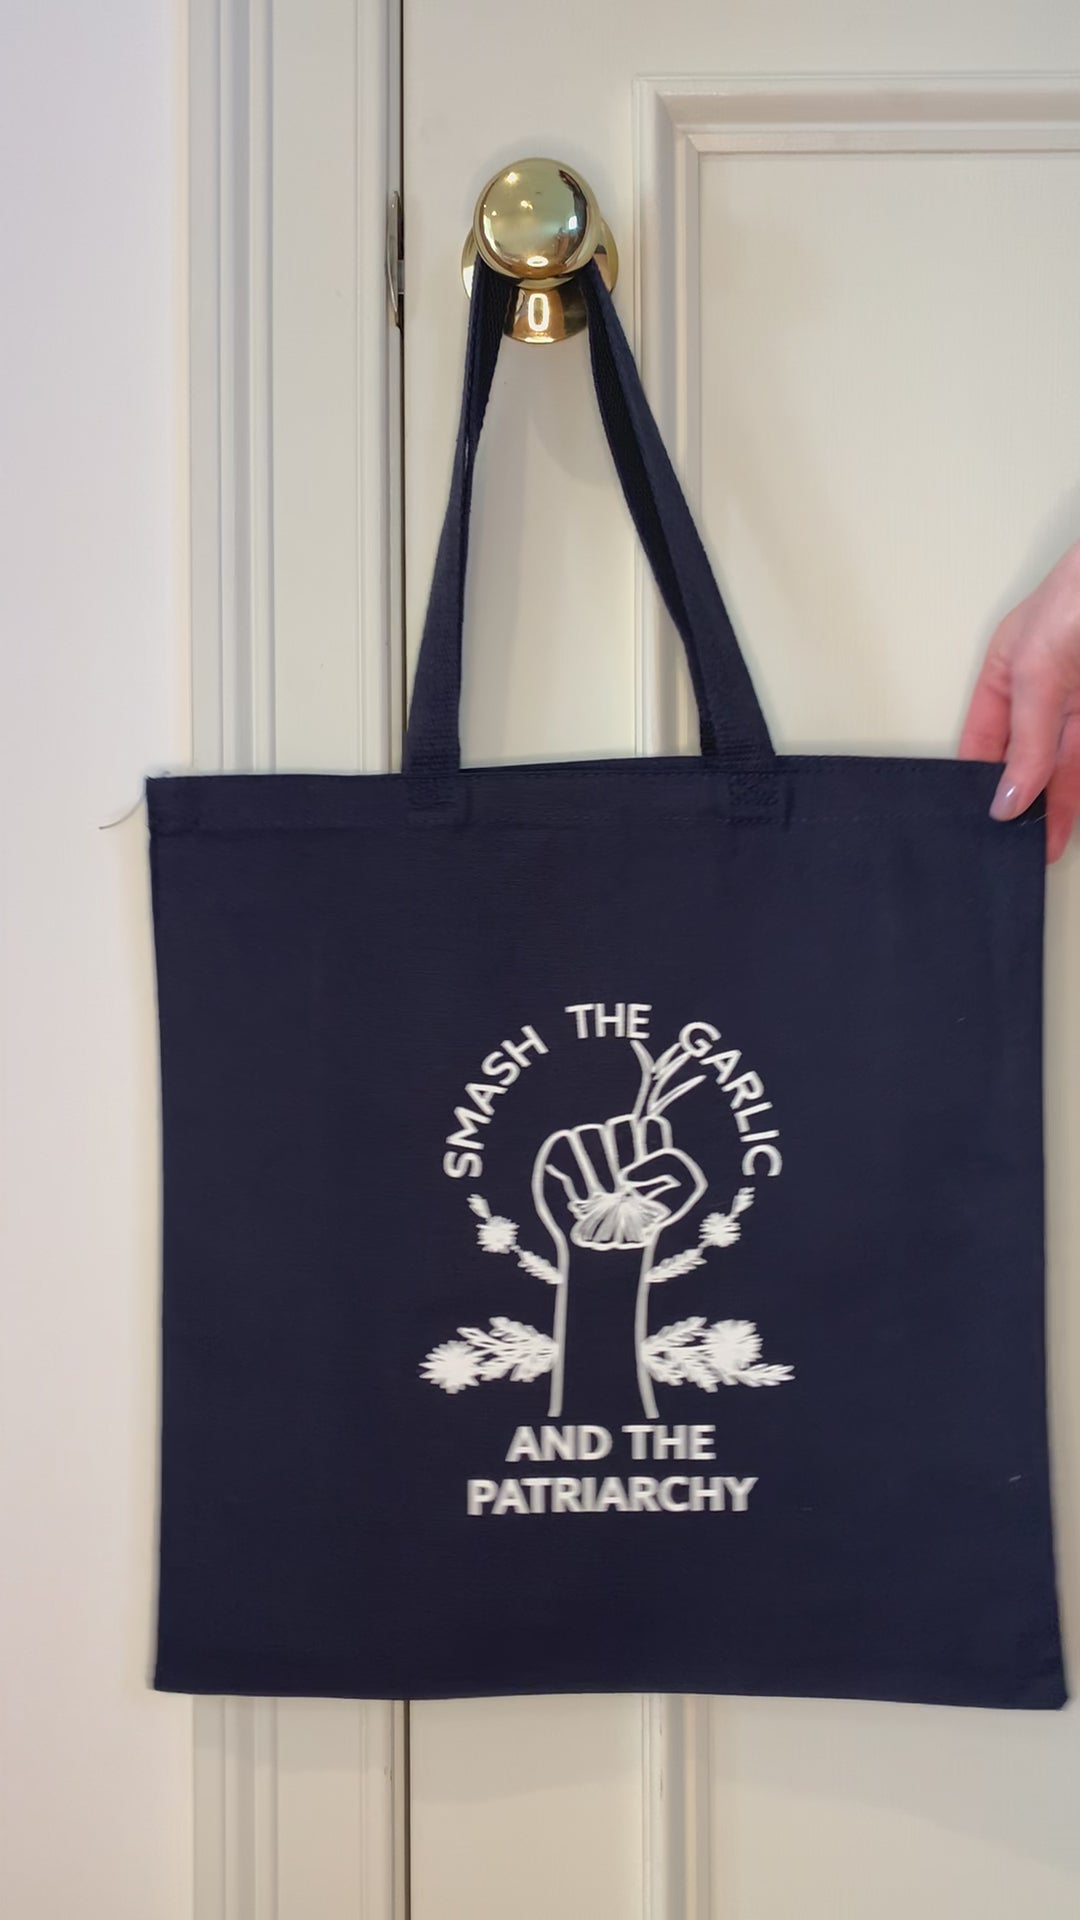 A navy blue tote that reads "Smash the Garlic and the Patriarchy" hangs on a doorknob